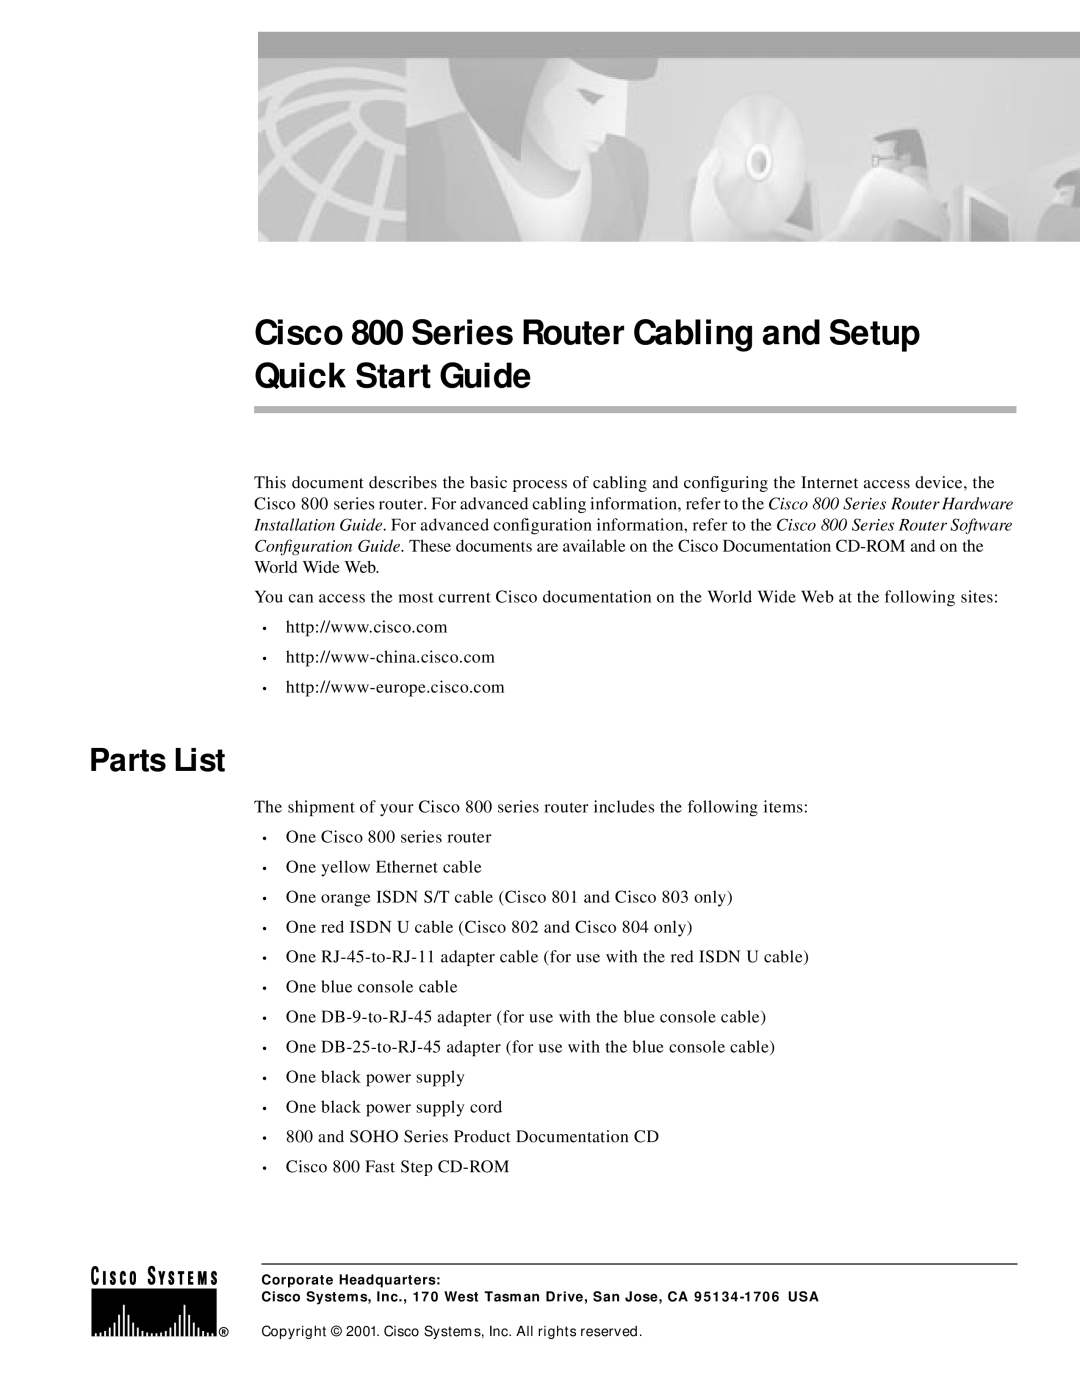 Cisco Systems 2800 Series quick start Parts List, Cisco 800 Series Router Cabling and Setup Quick Start Guide 